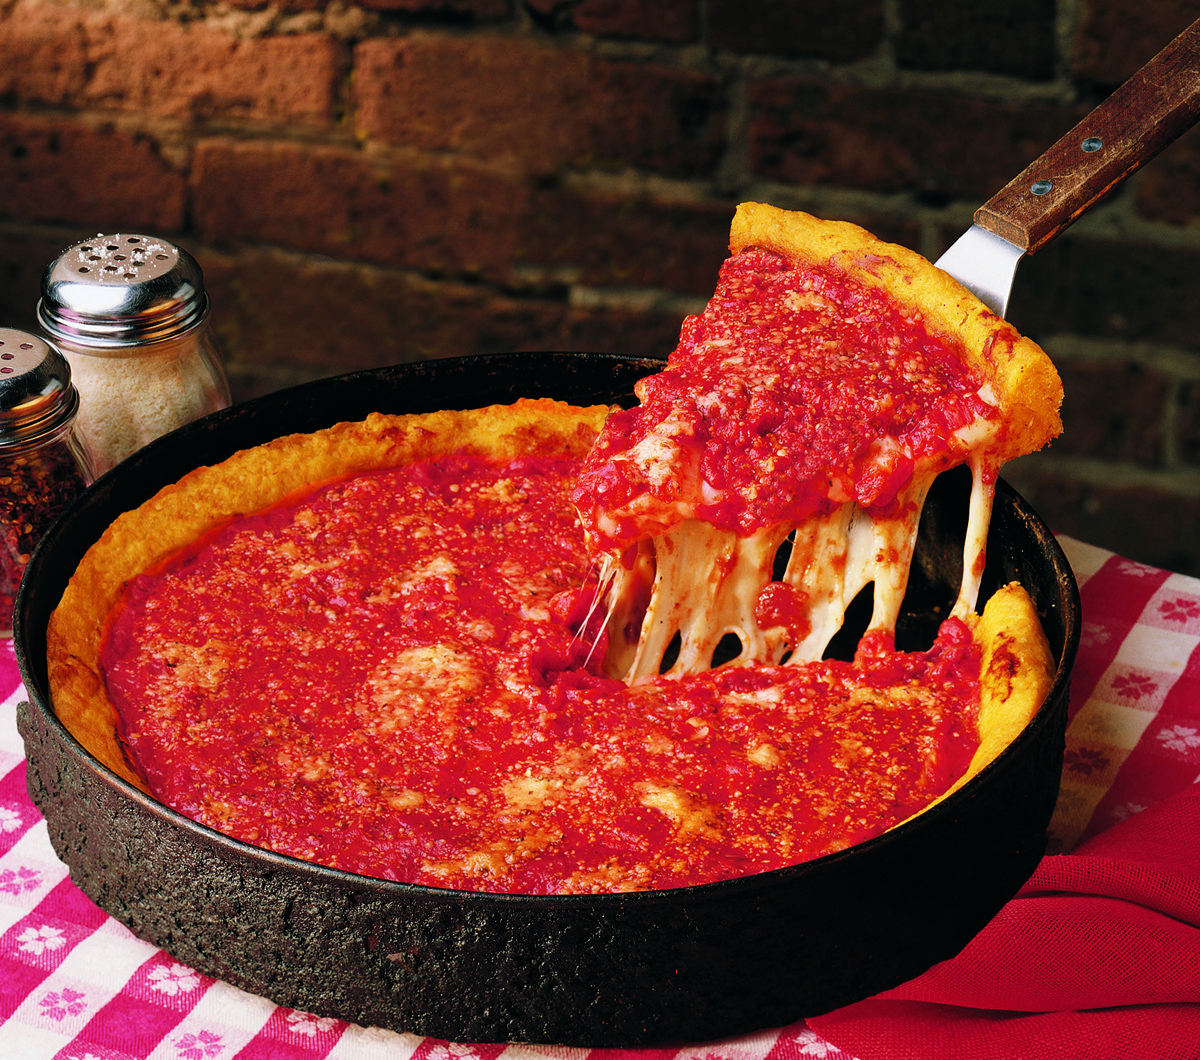 Gino's East Deep Dish. I love NY pizza but don't hate on the Chicago style. 